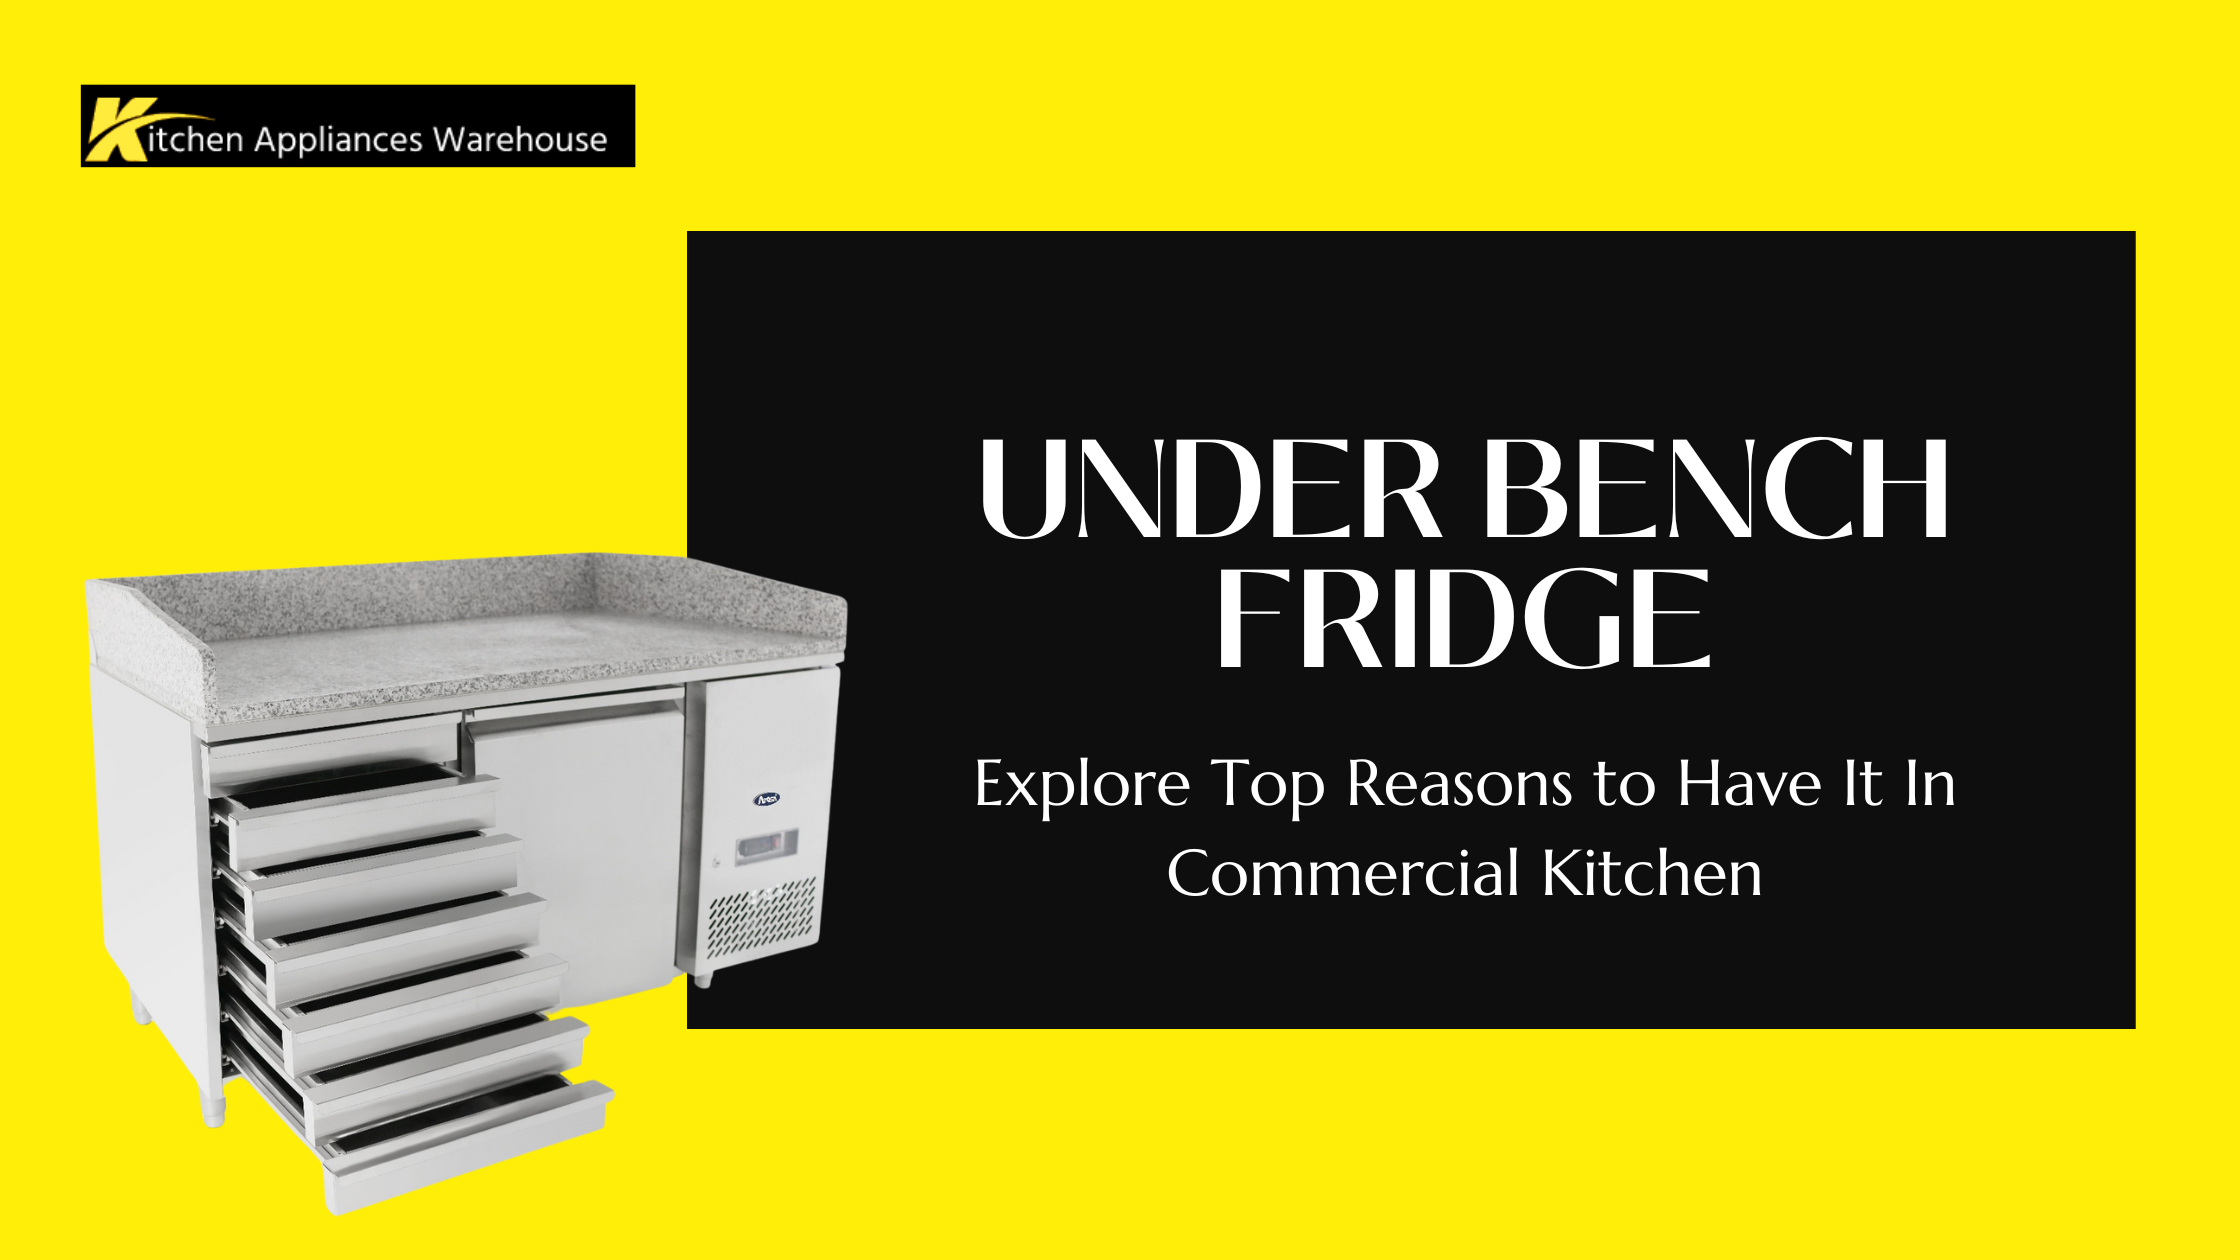 Explore Top Reasons to Have a Under Bench Fridge in commercial Kitchen